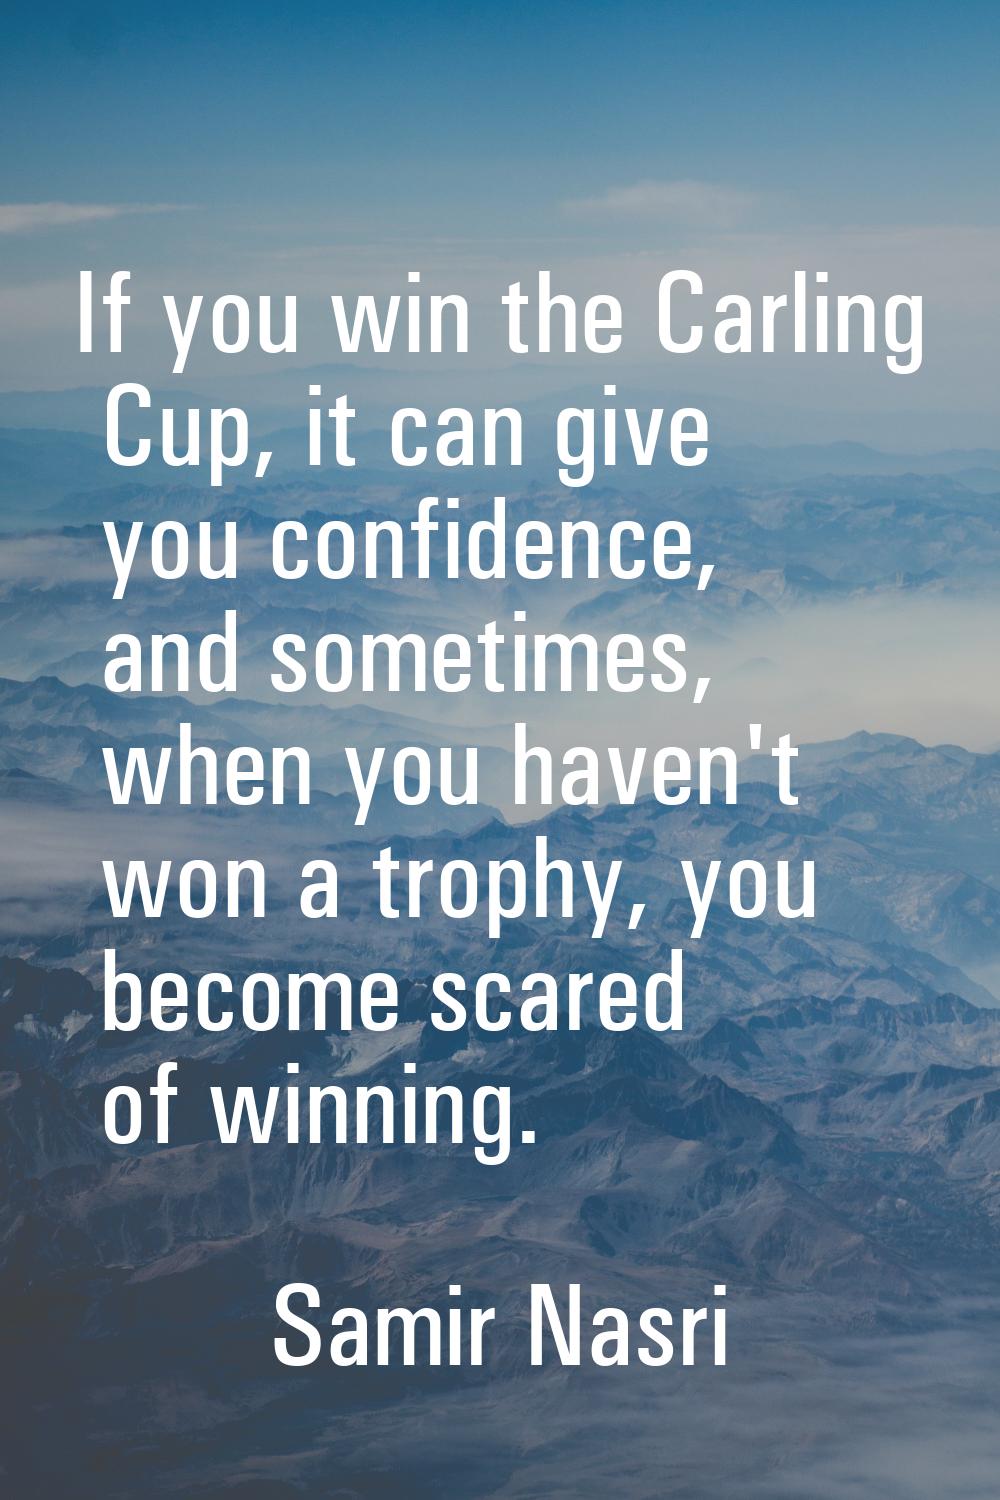 If you win the Carling Cup, it can give you confidence, and sometimes, when you haven't won a troph